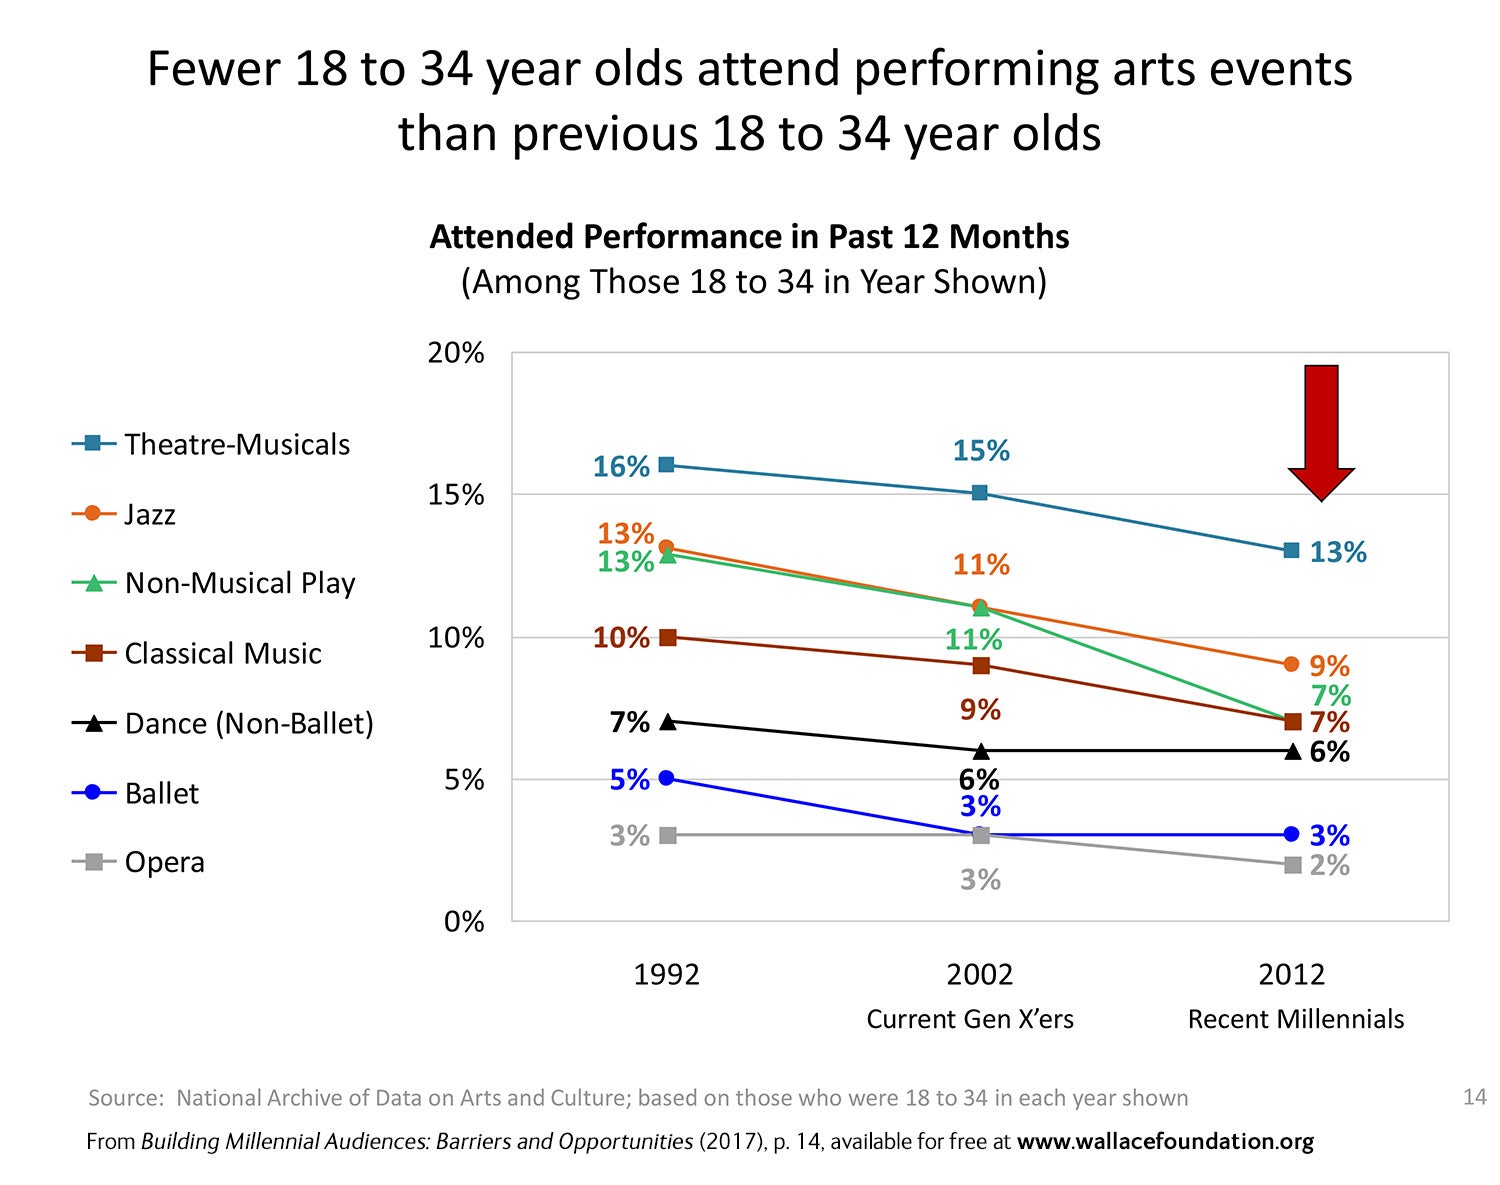 Chart: Fewer 18 to 24 year olds attend performing arts events than previous 18 to 24 year olds